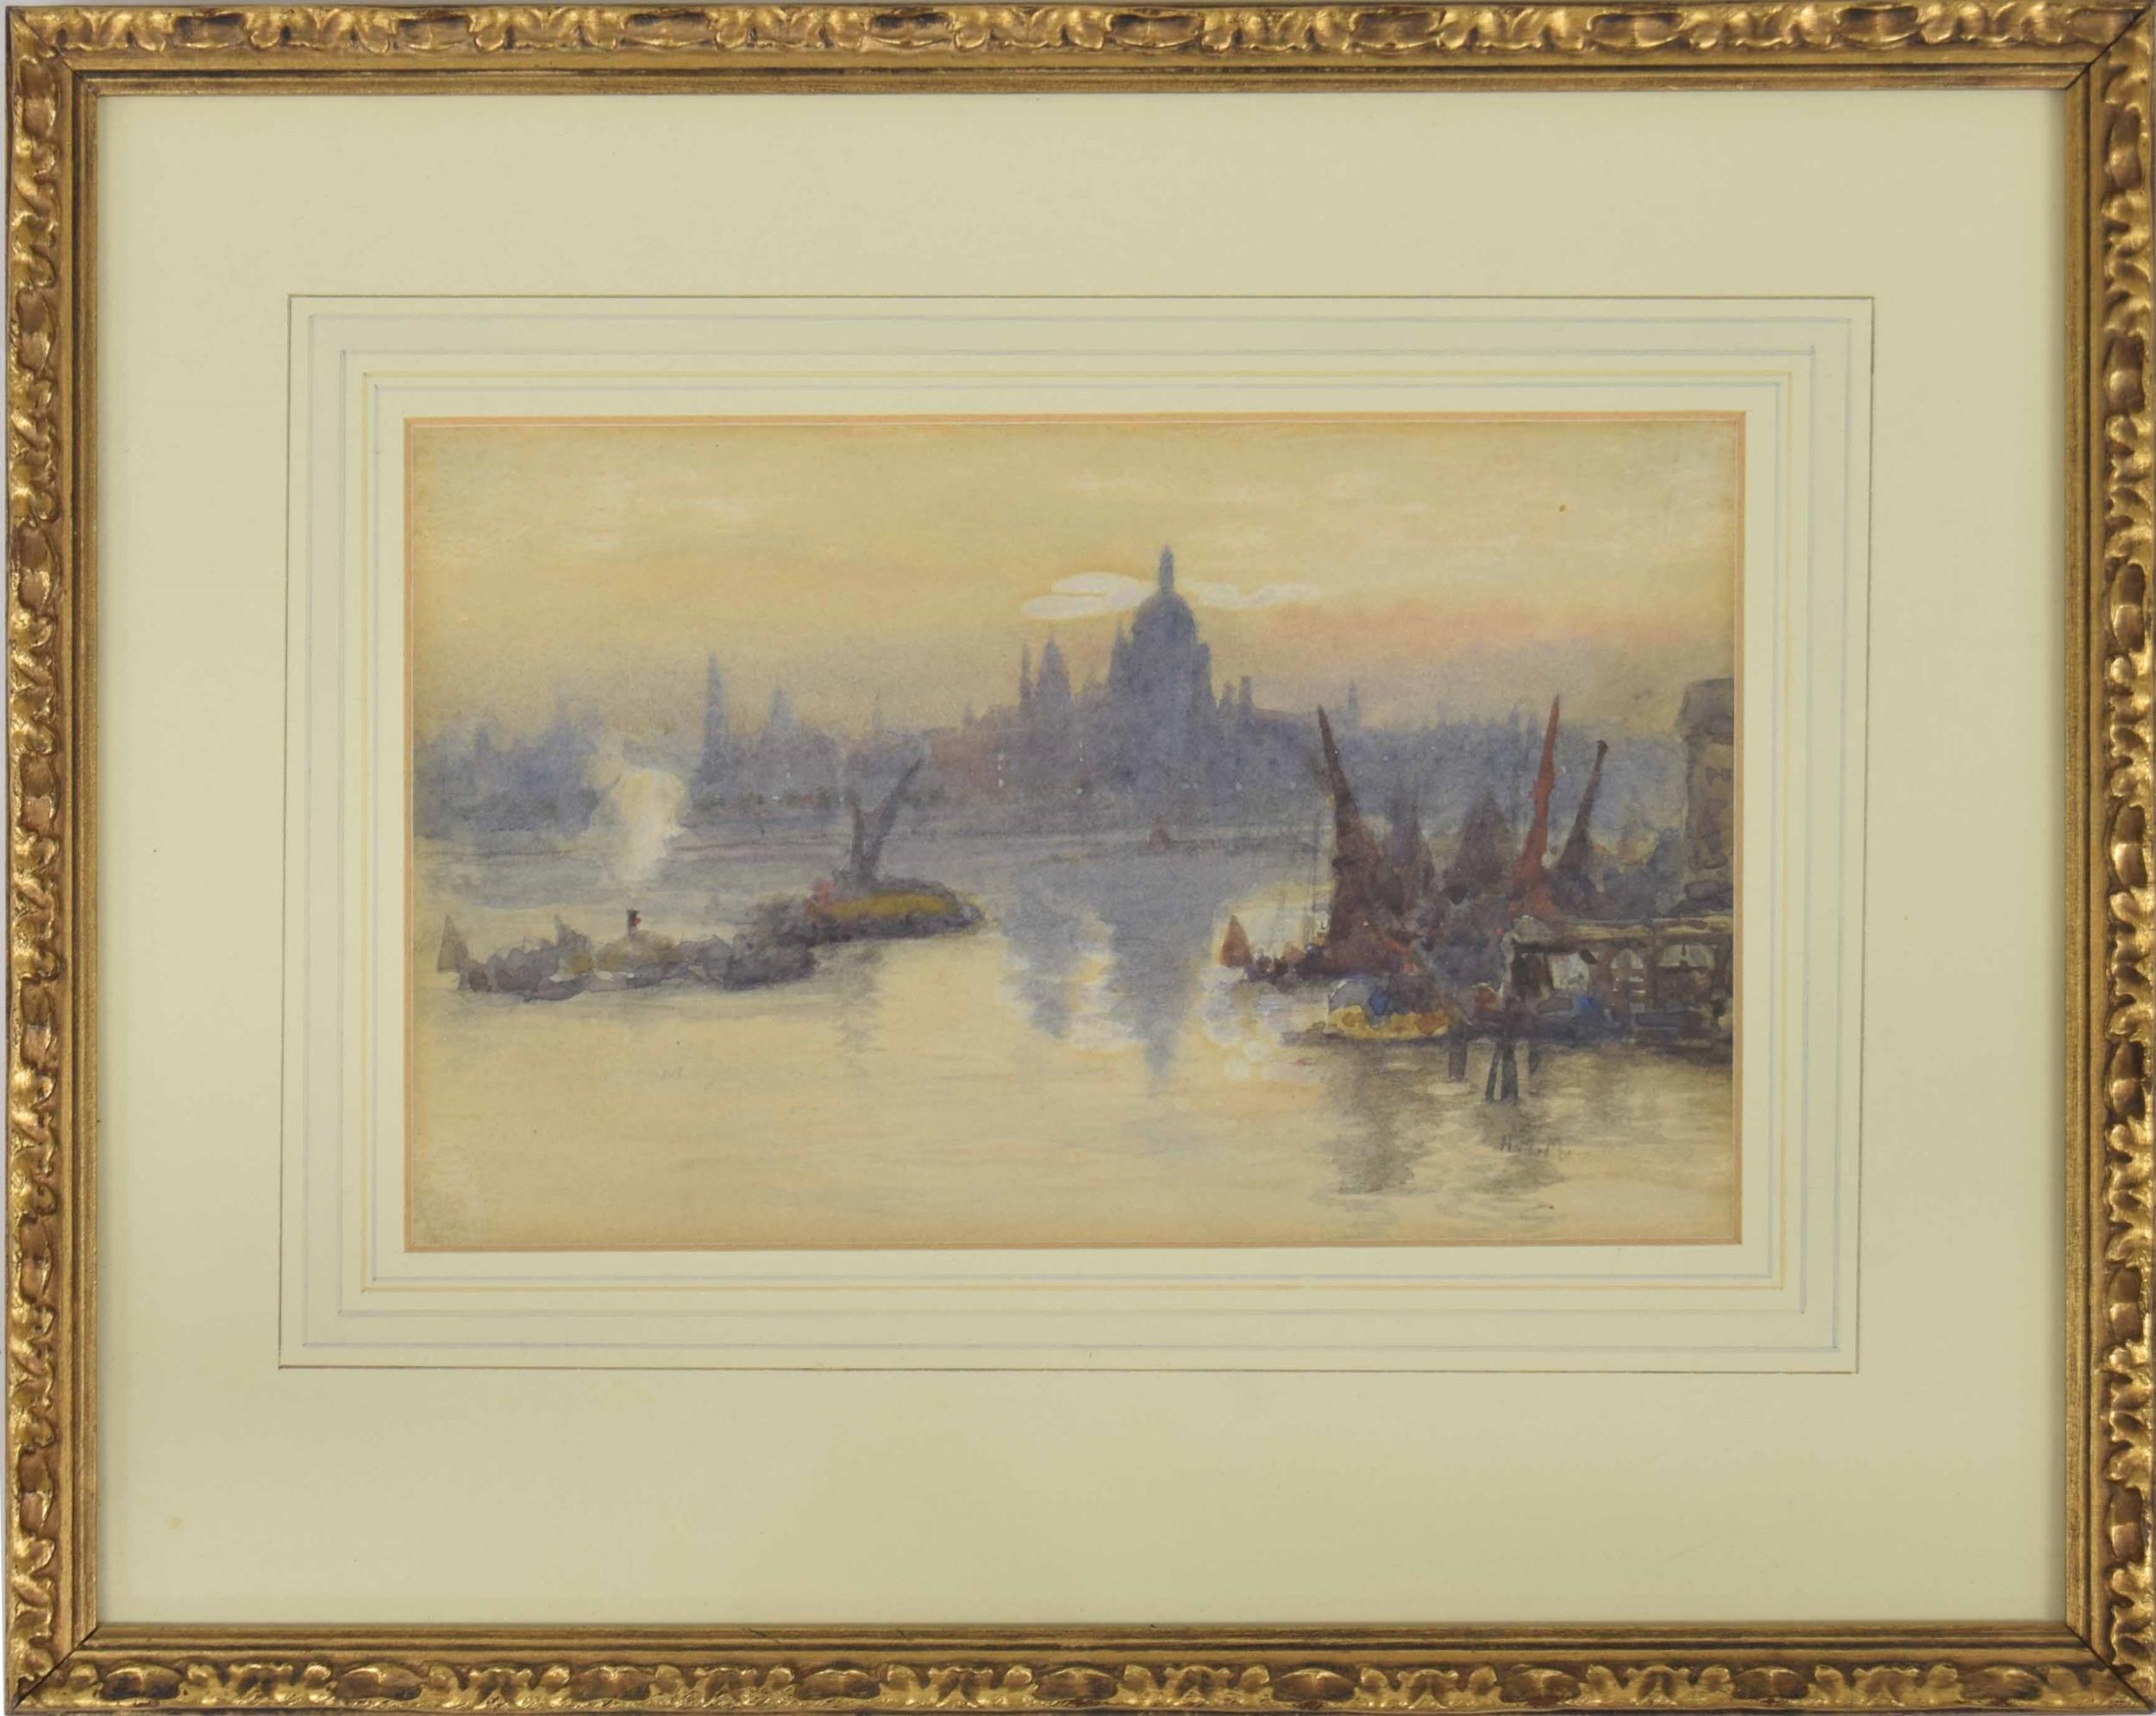 Herbert Menzies Marshall VPRWS, RE, ROI (1841-1913) - 'St Paul's from The Thames', signed with the